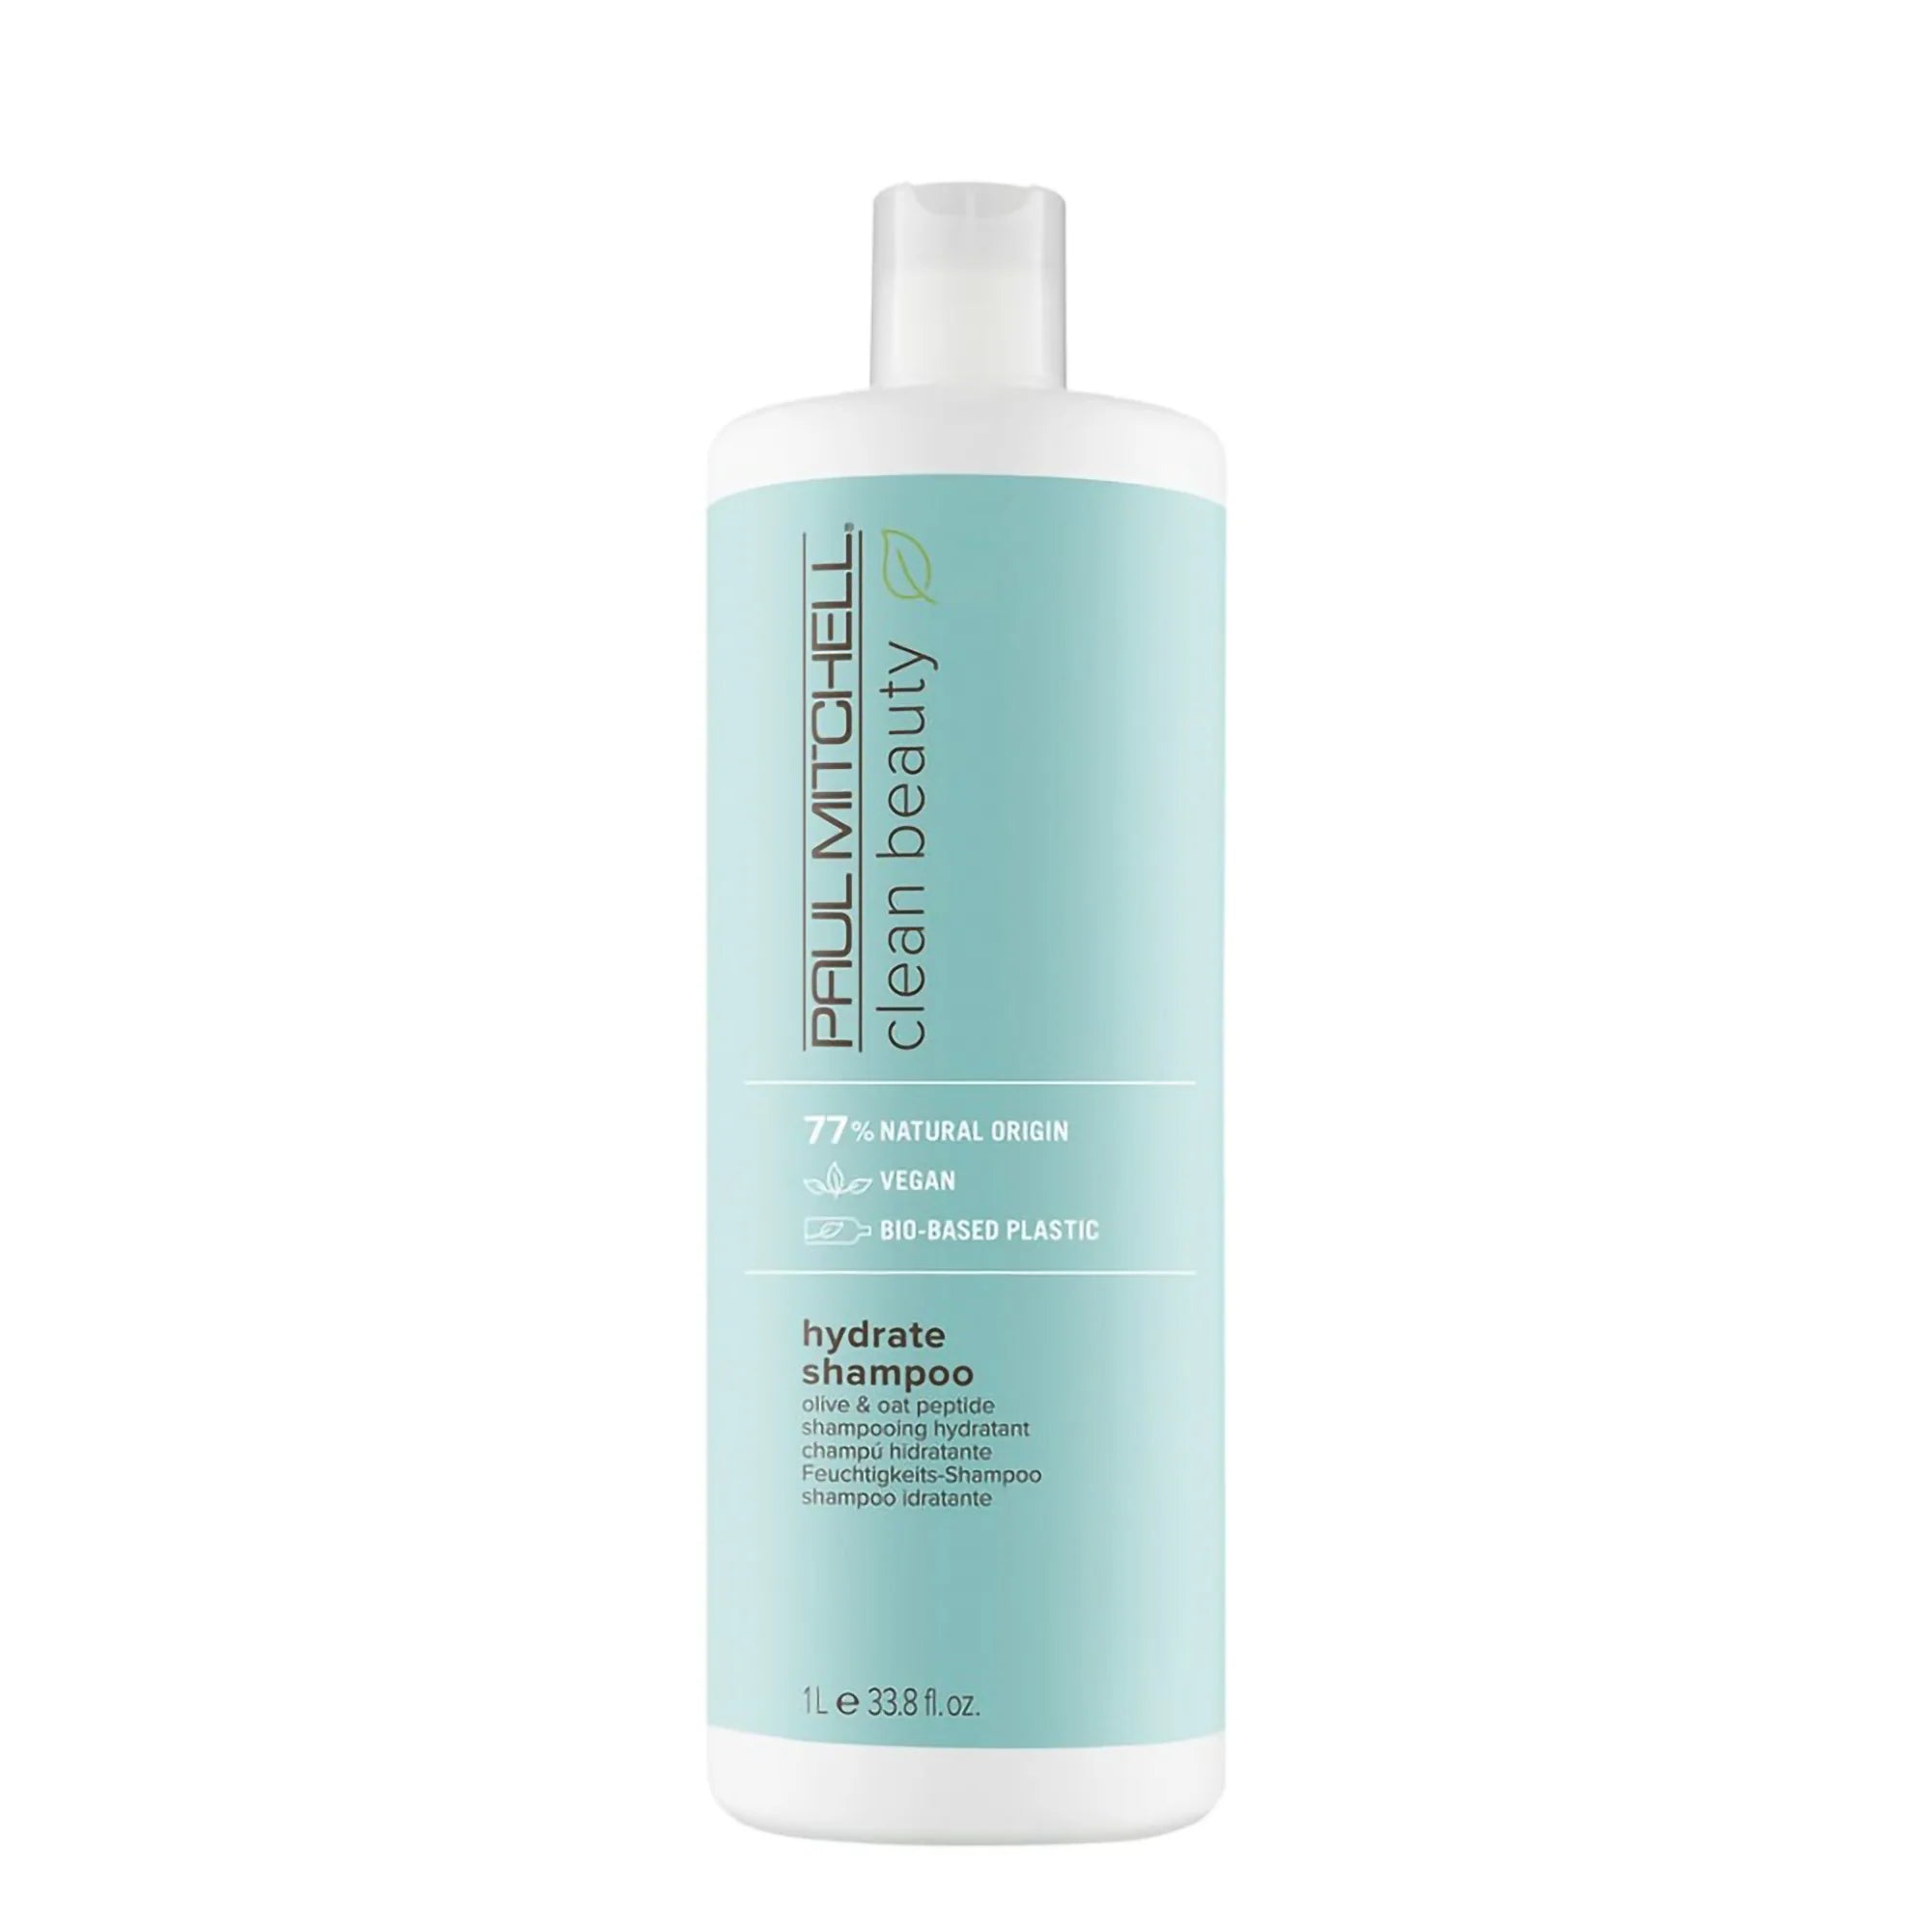 Paul Mitchell Clean Beauty Hydrate Shampoo & Conditioner 1 Litre Duo